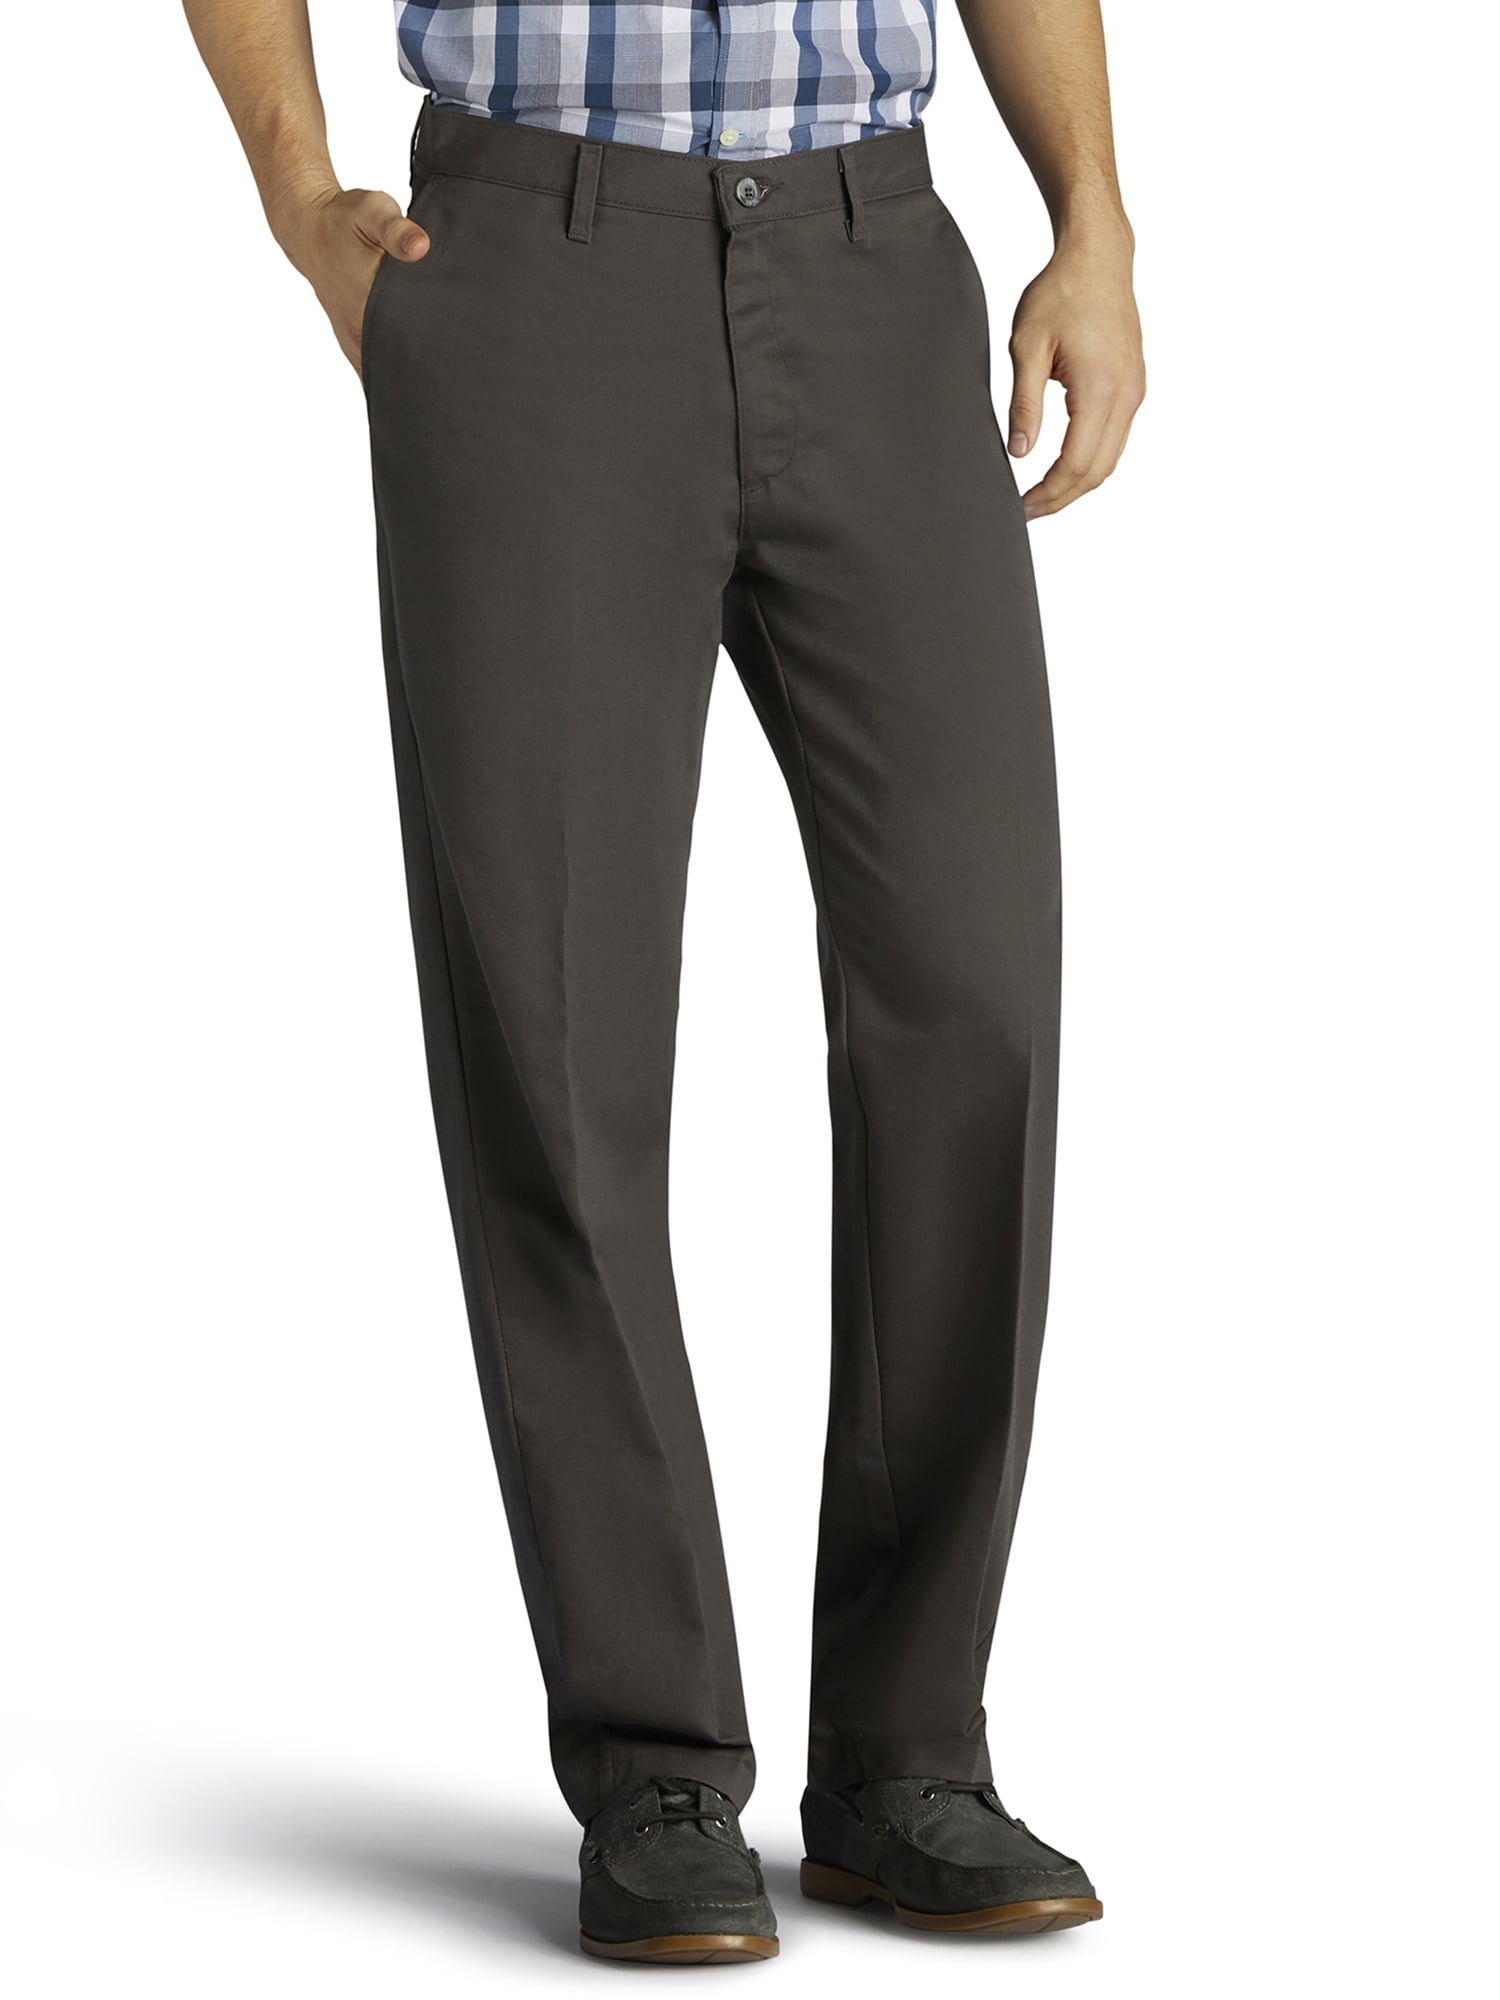 Lee Men's Total Freedom Relaxed Fit Tapered Leg Pant - Walmart.com